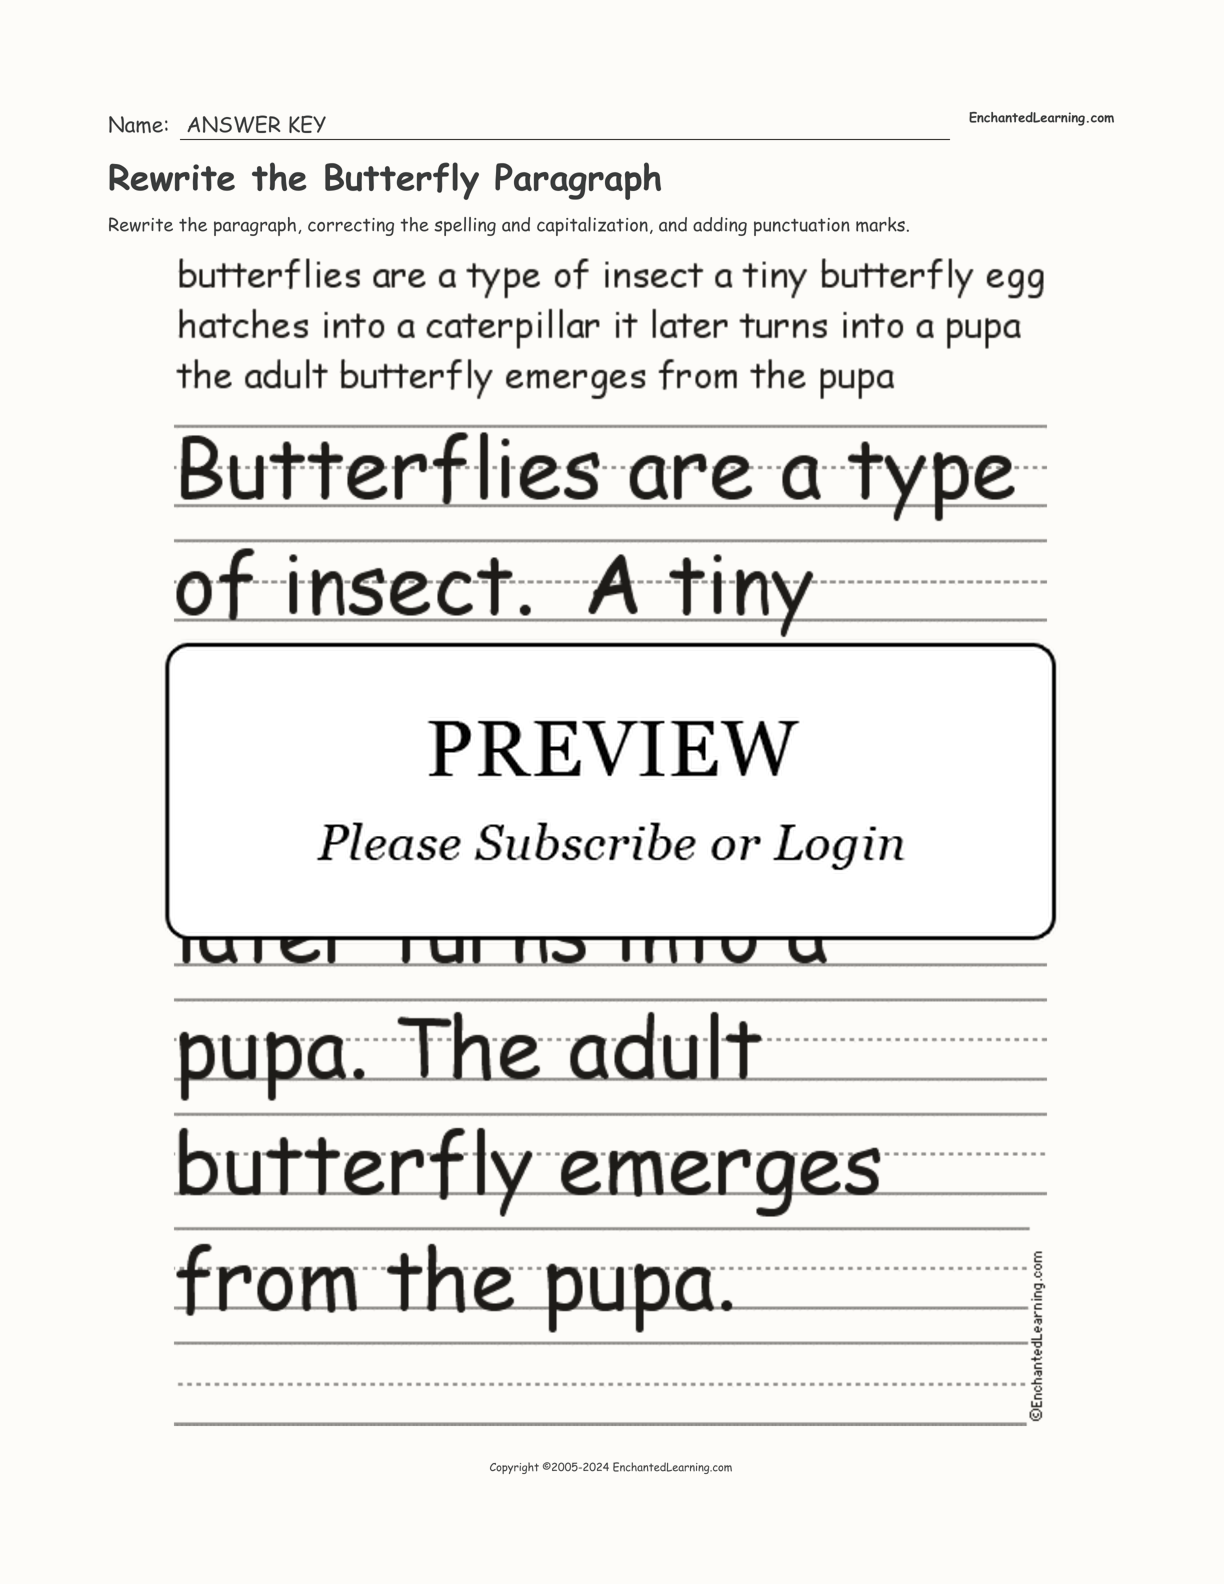 Rewrite the Butterfly Paragraph interactive worksheet page 2